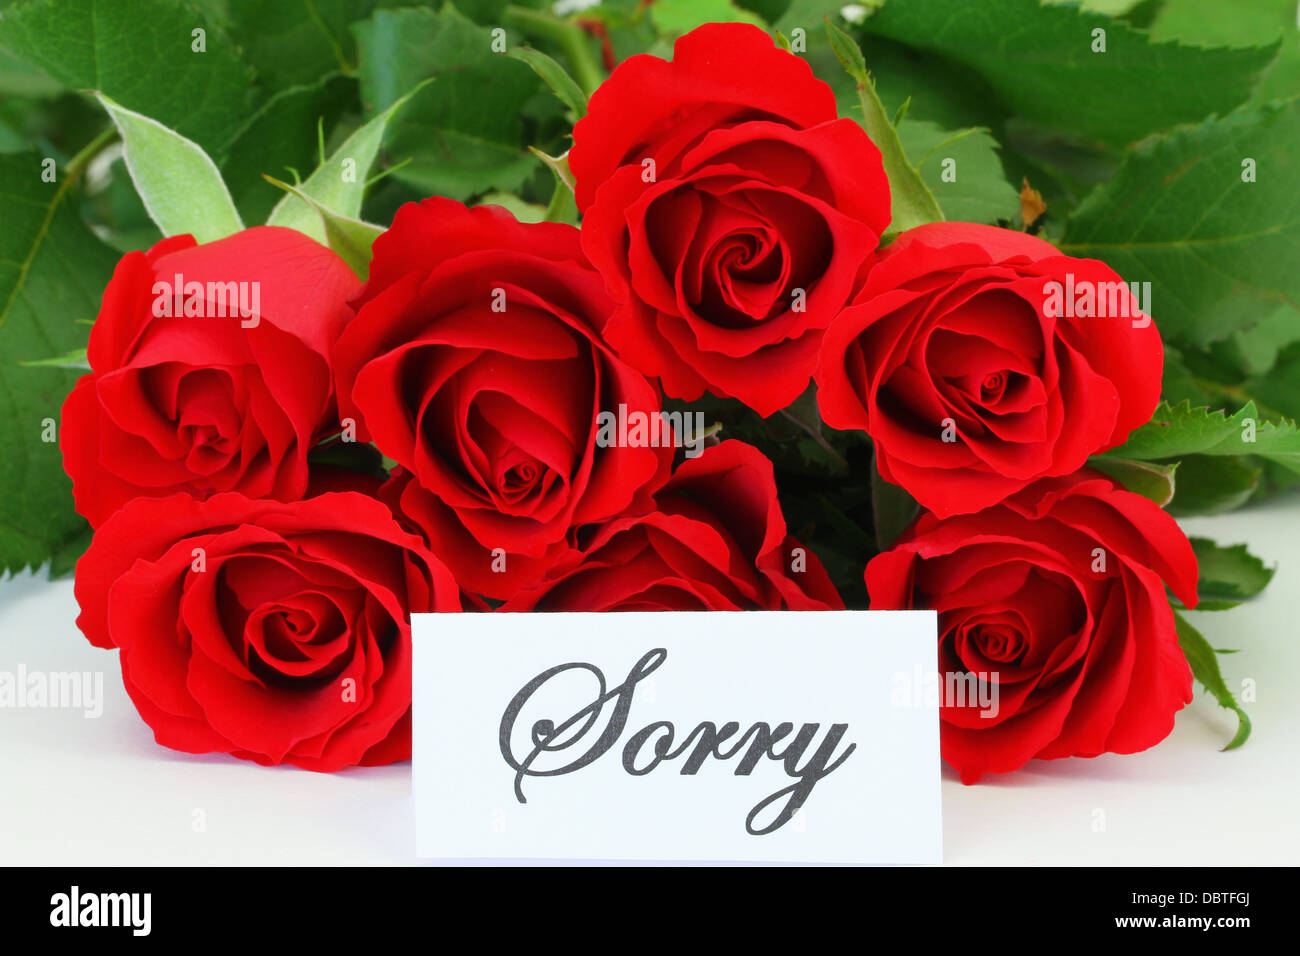 Sorry card with red roses Stock Photo - Alamy